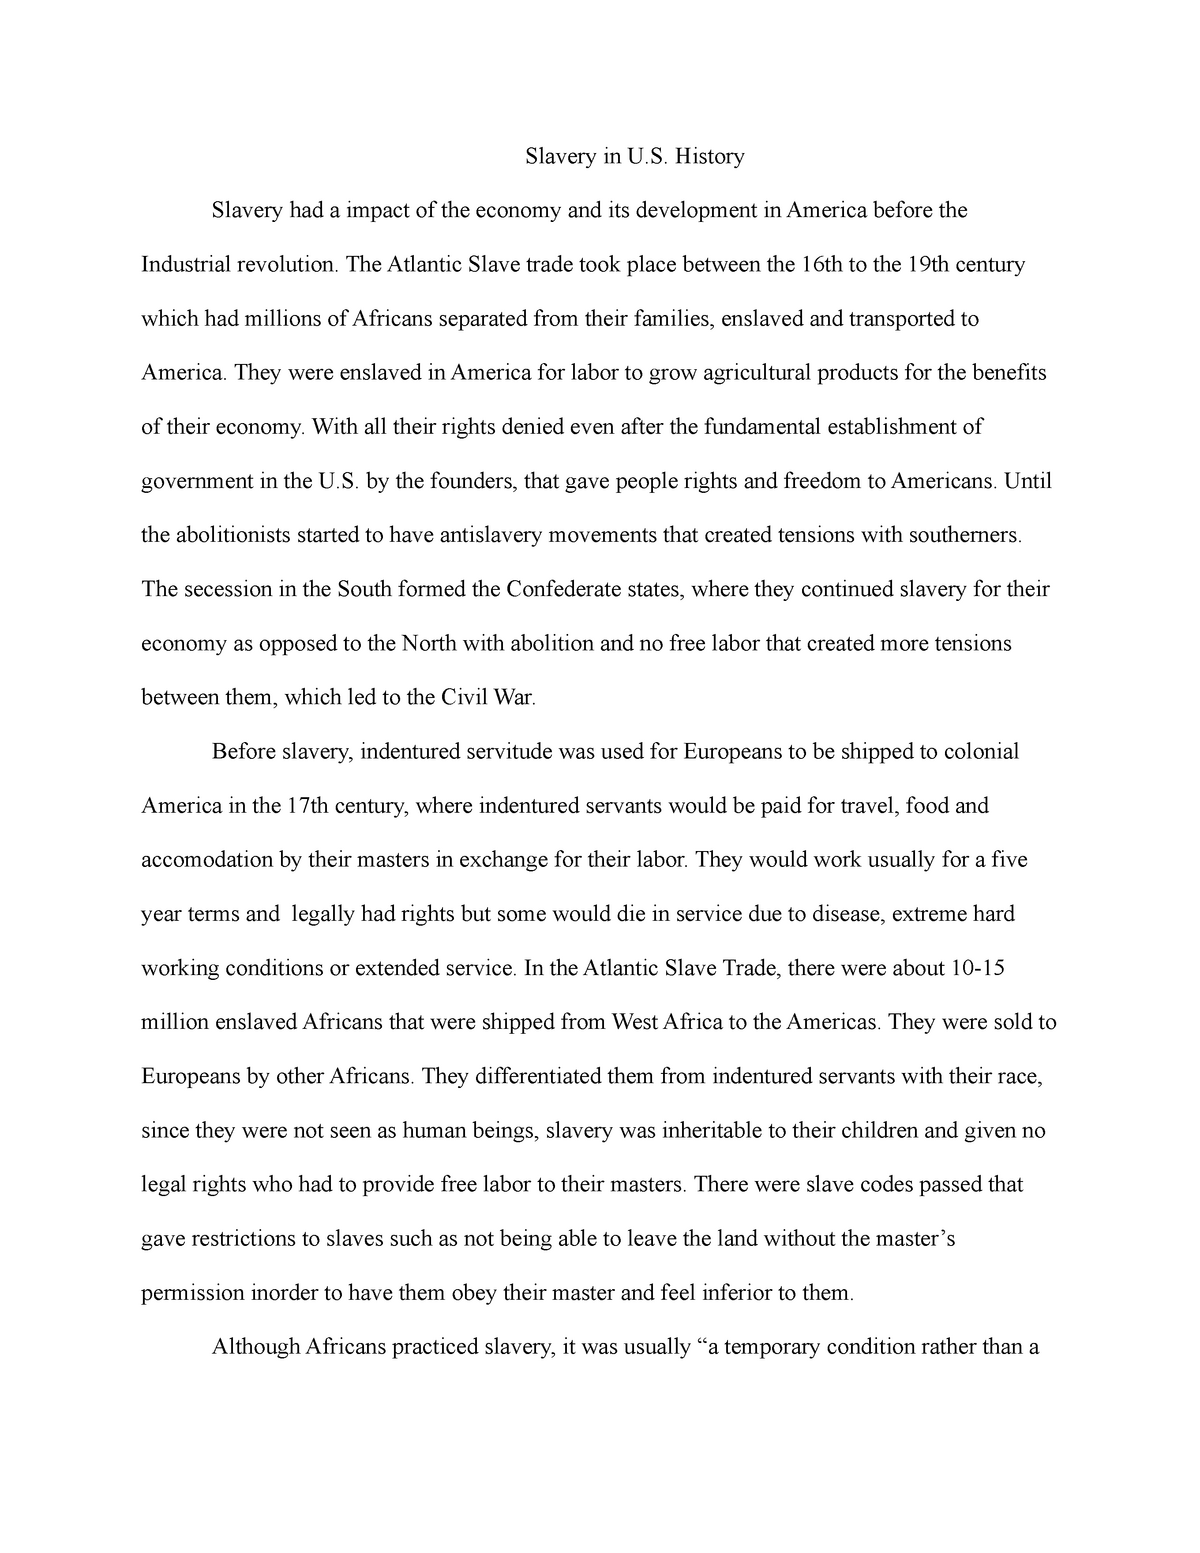 introduction for slavery essay